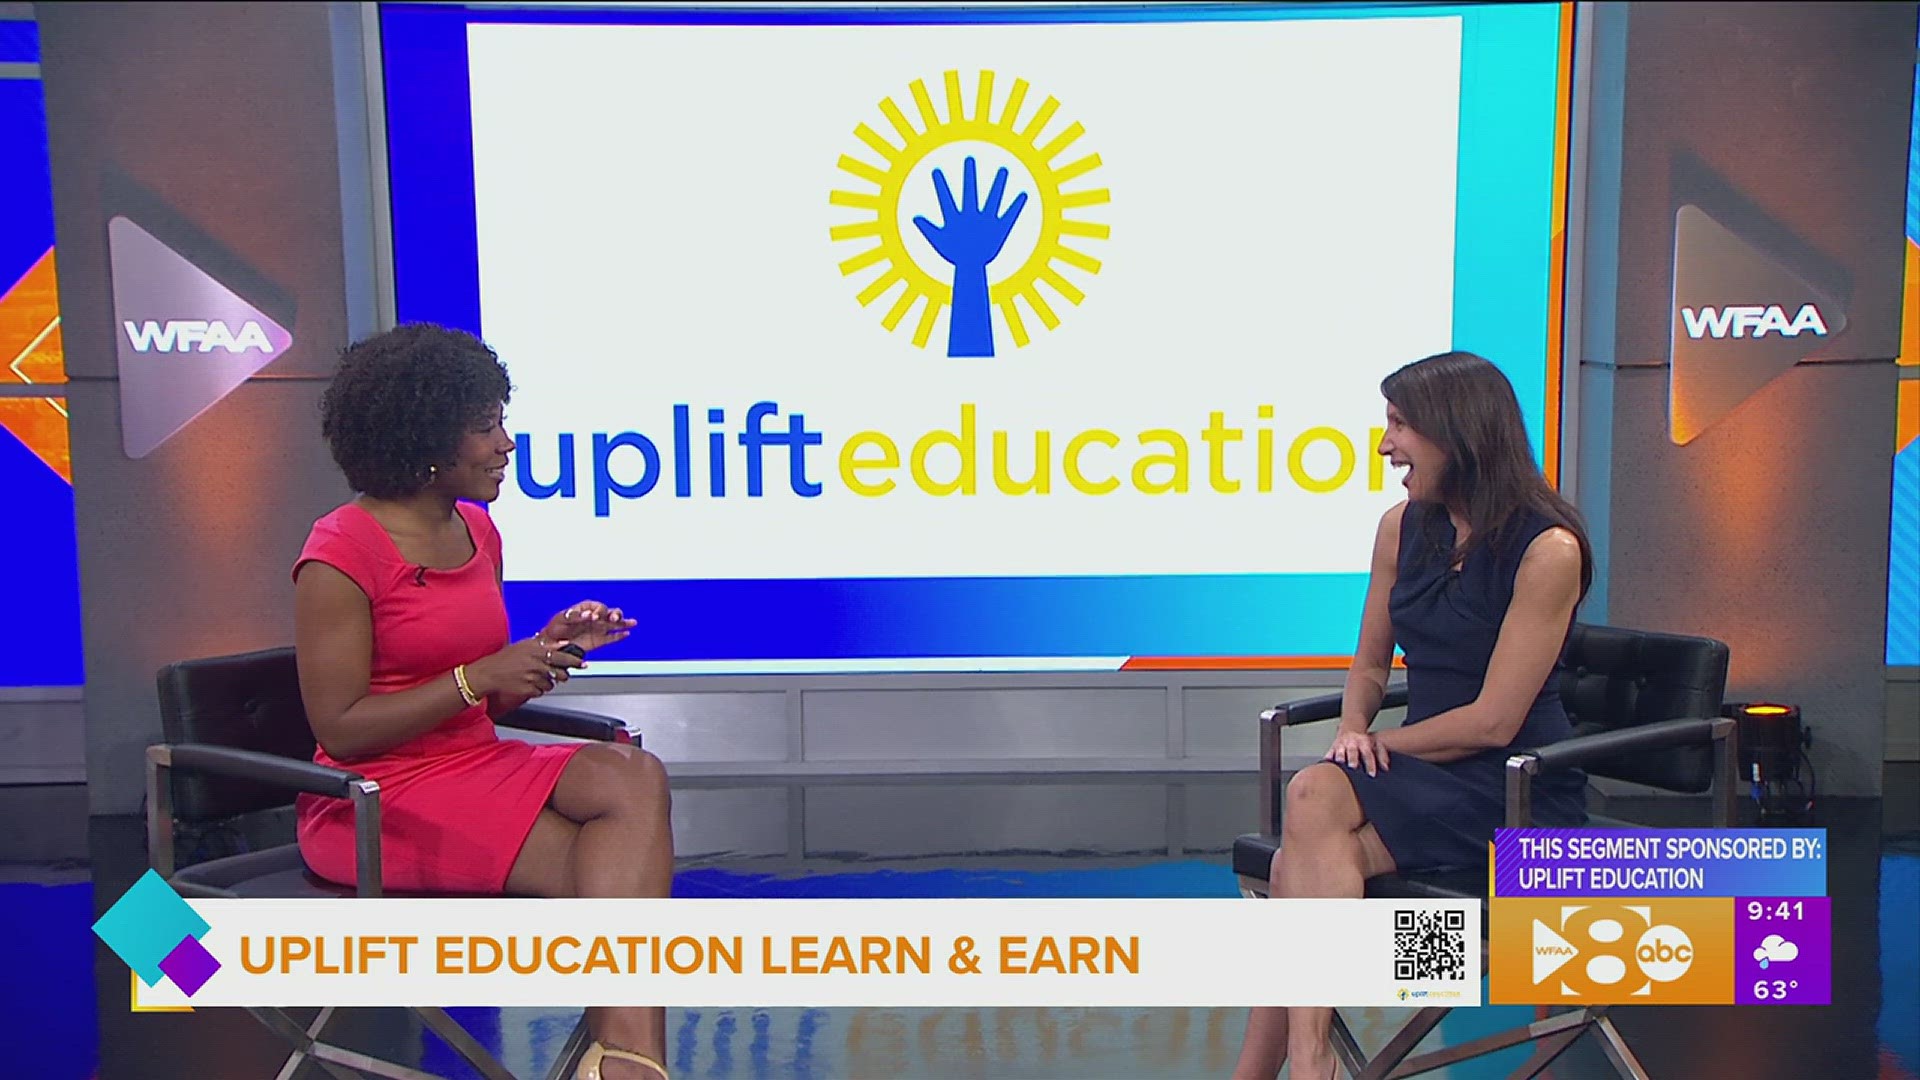 This segment is sponsored by: Uplift Education